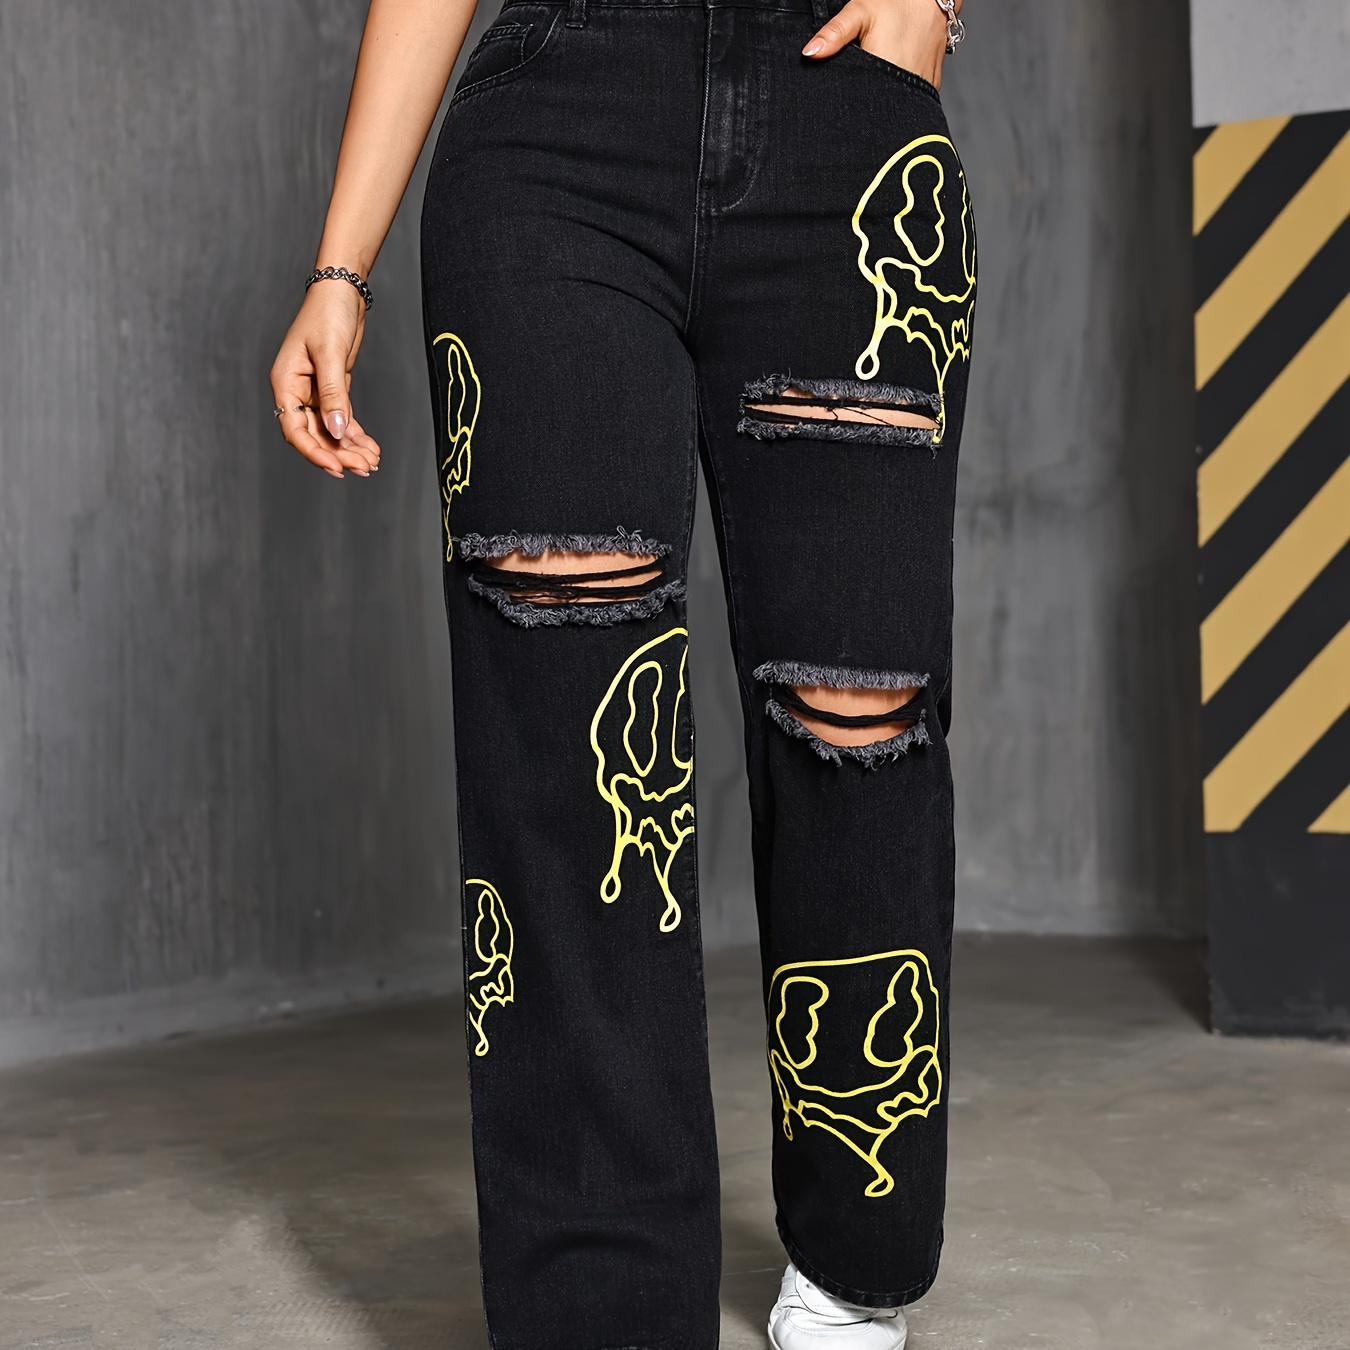 

Women's High Waist Street Style Jeans With Neon Art And Ripped Detail, Casual Fashion, Distressed Denim Pants For Trendy Urban Outfits For Autumn - Perfect For Fall